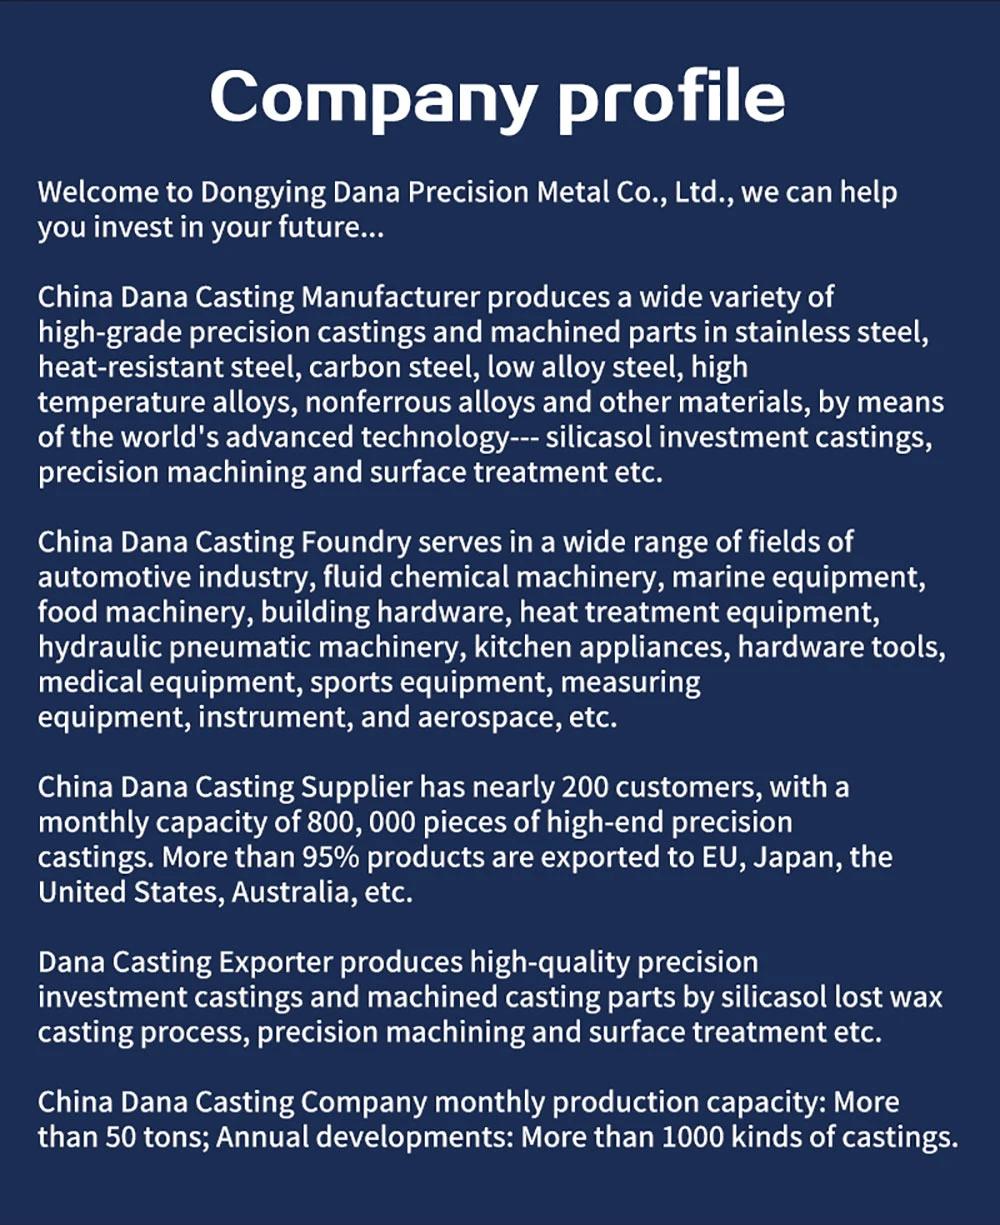 Investment Casting/ Machining/ Lost Wax Casting/ Precision Casting